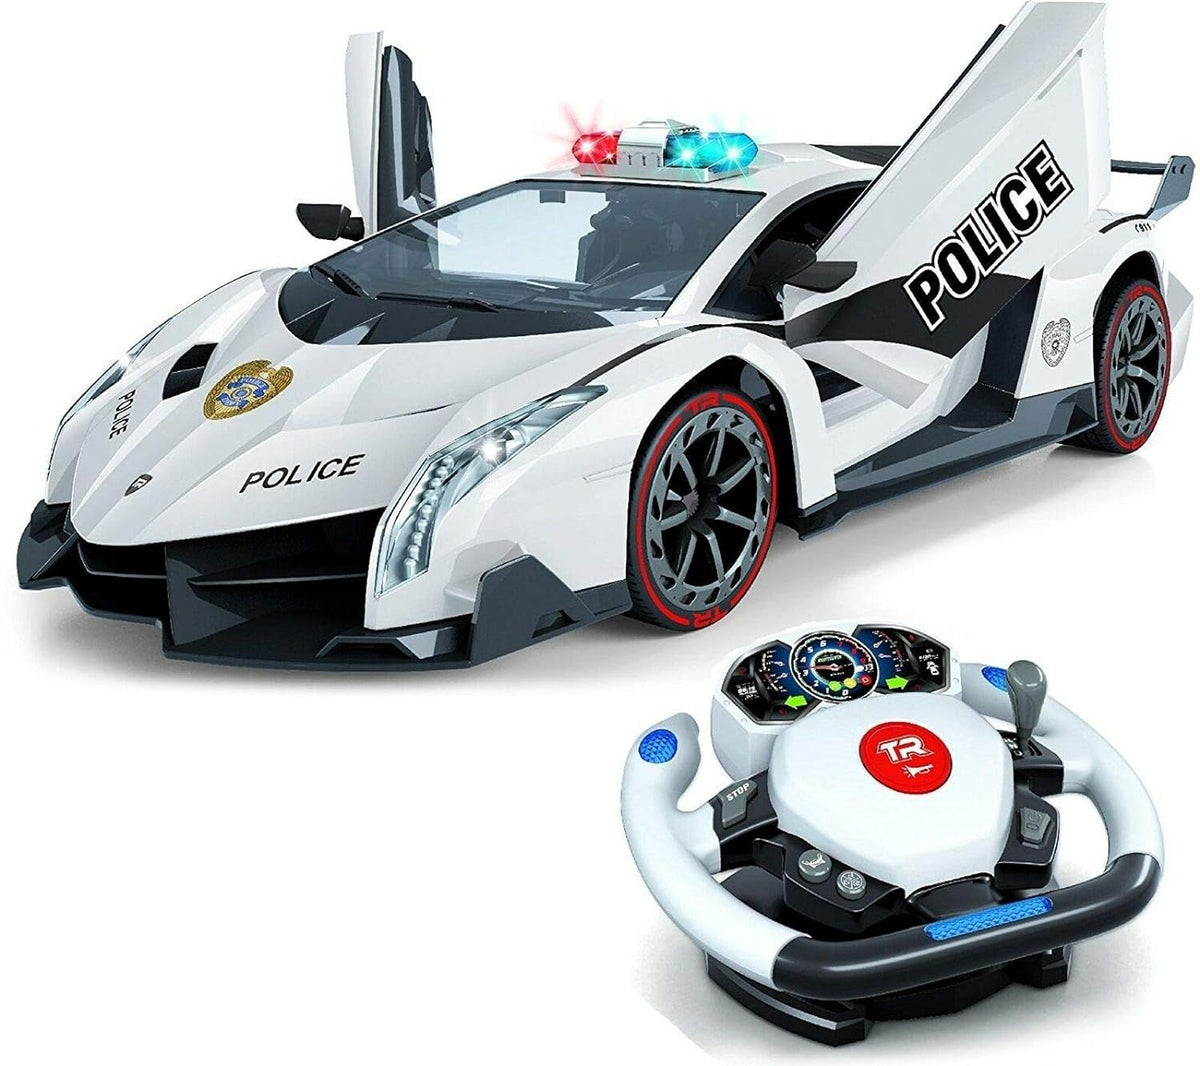 Remote Control Police Car, 4D Motion Gravity and Steering Wheel Control, 1: 12 Scale, 2. 4Ghz, with Lights, Sirens, Powered Doors